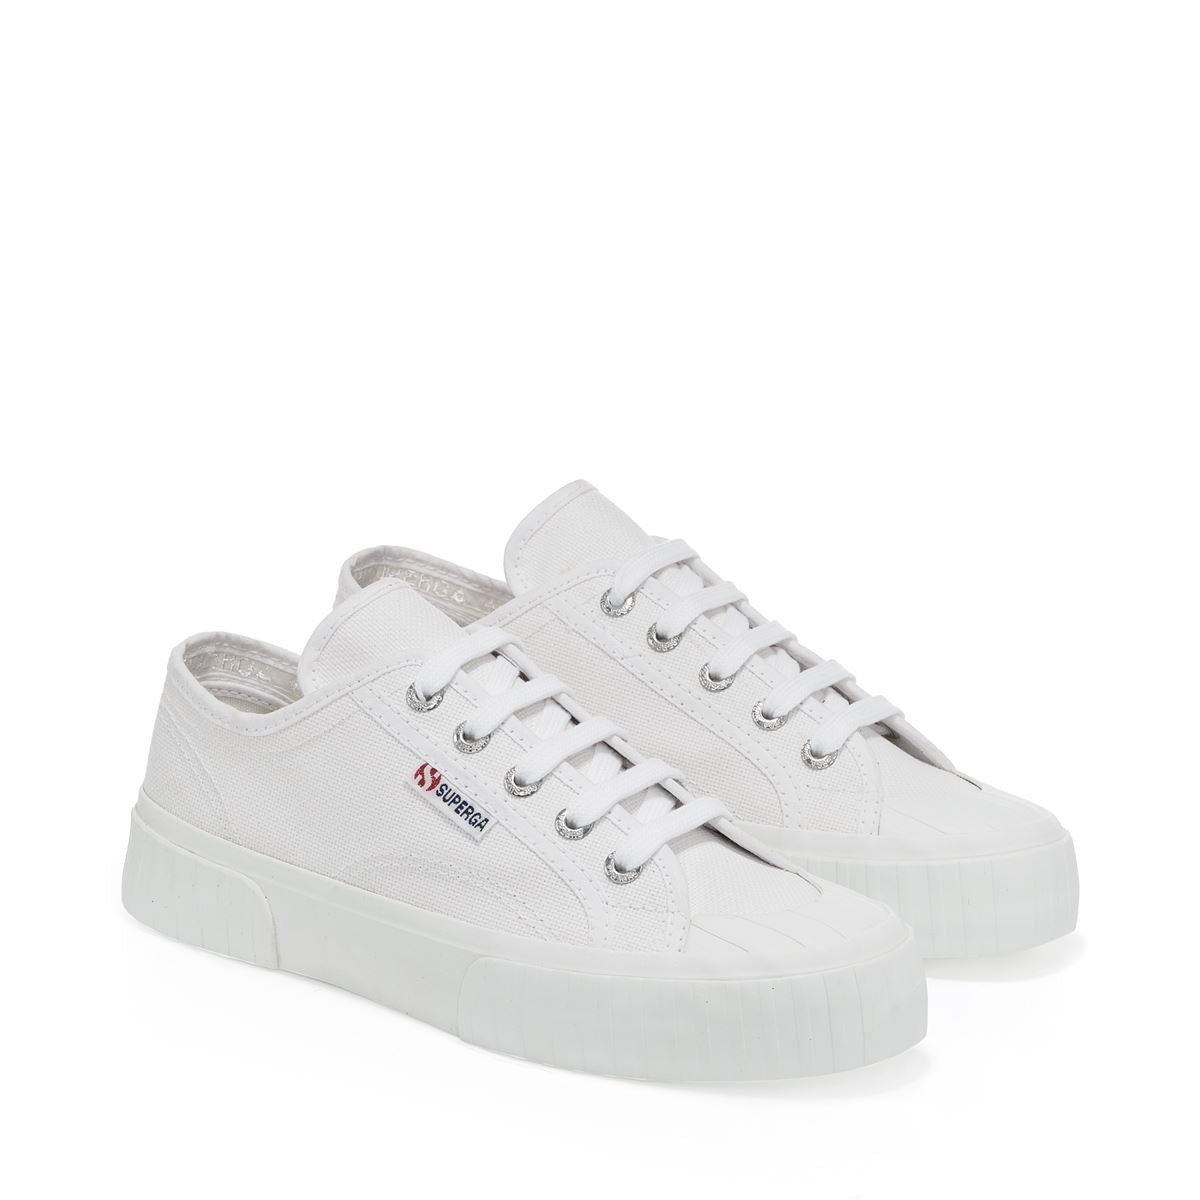 2555 Alpina Sneakers White- Hover Image